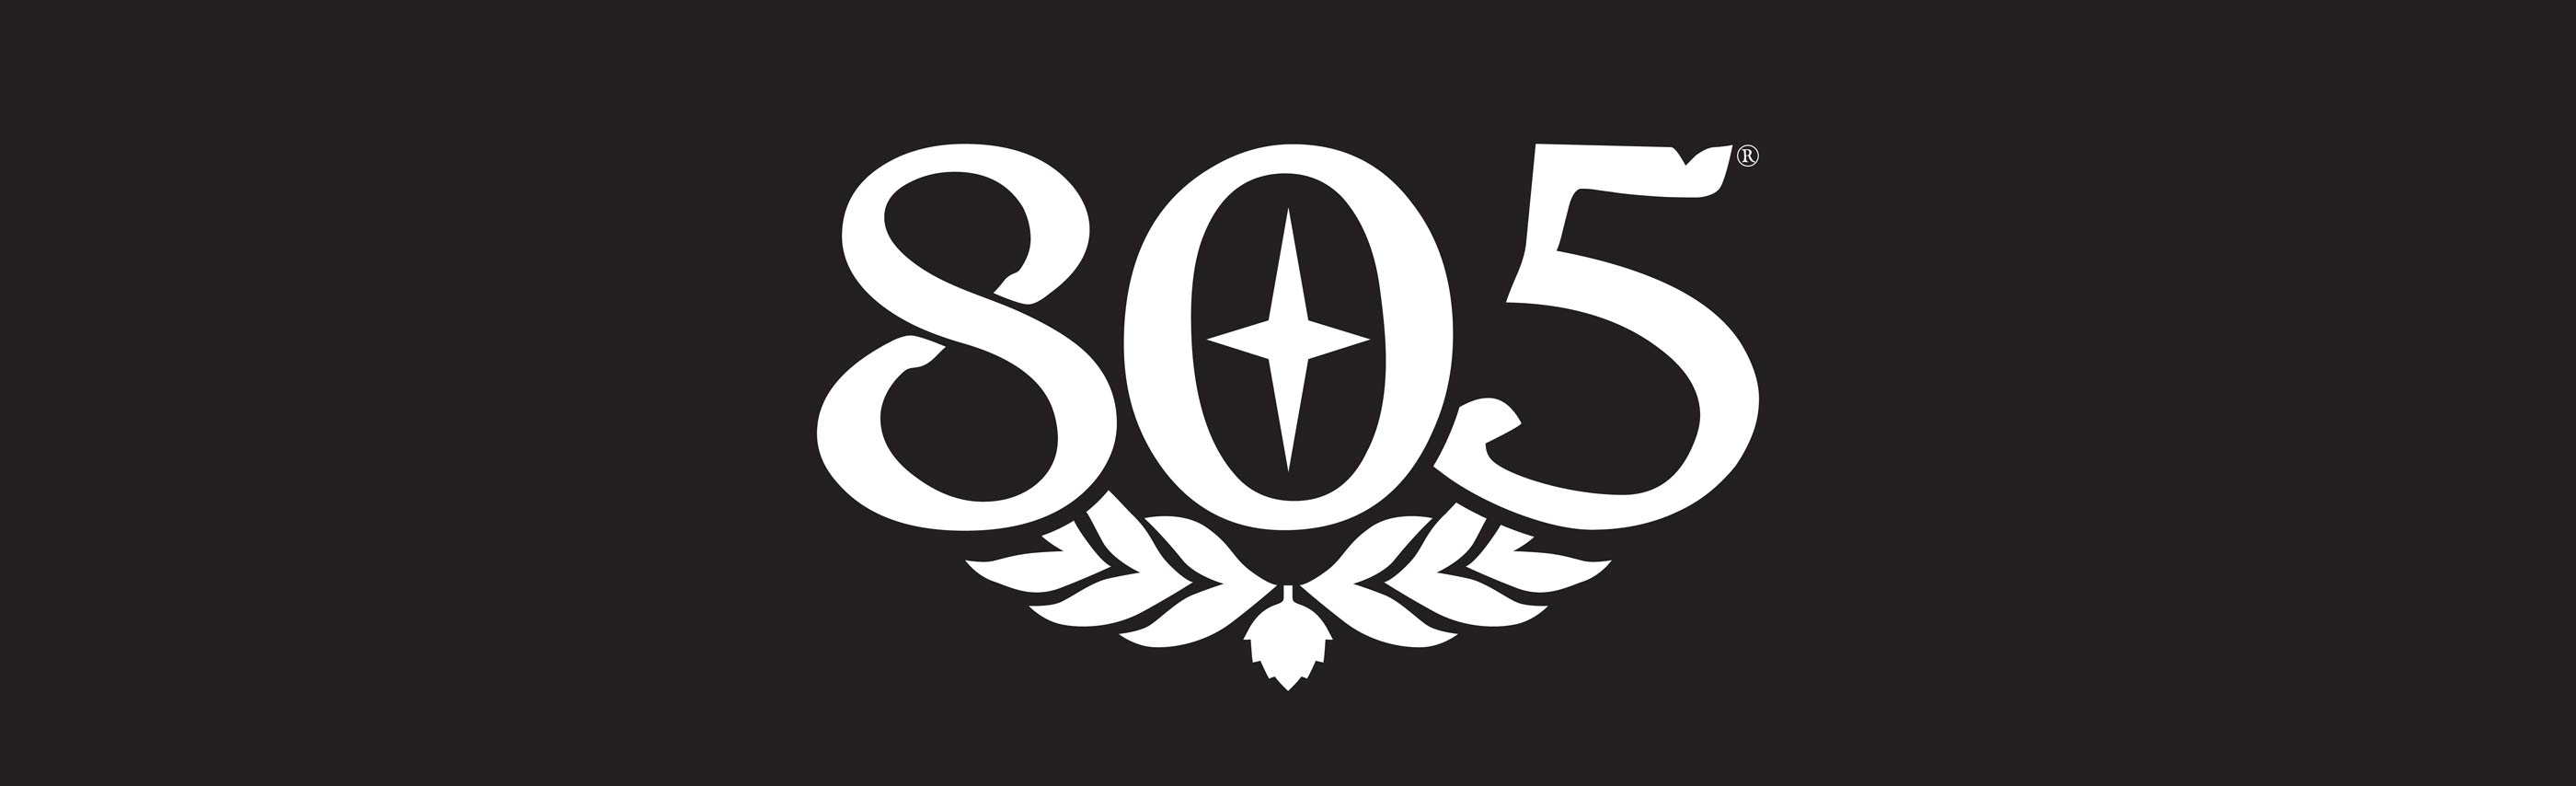 805 New Market Launch Party